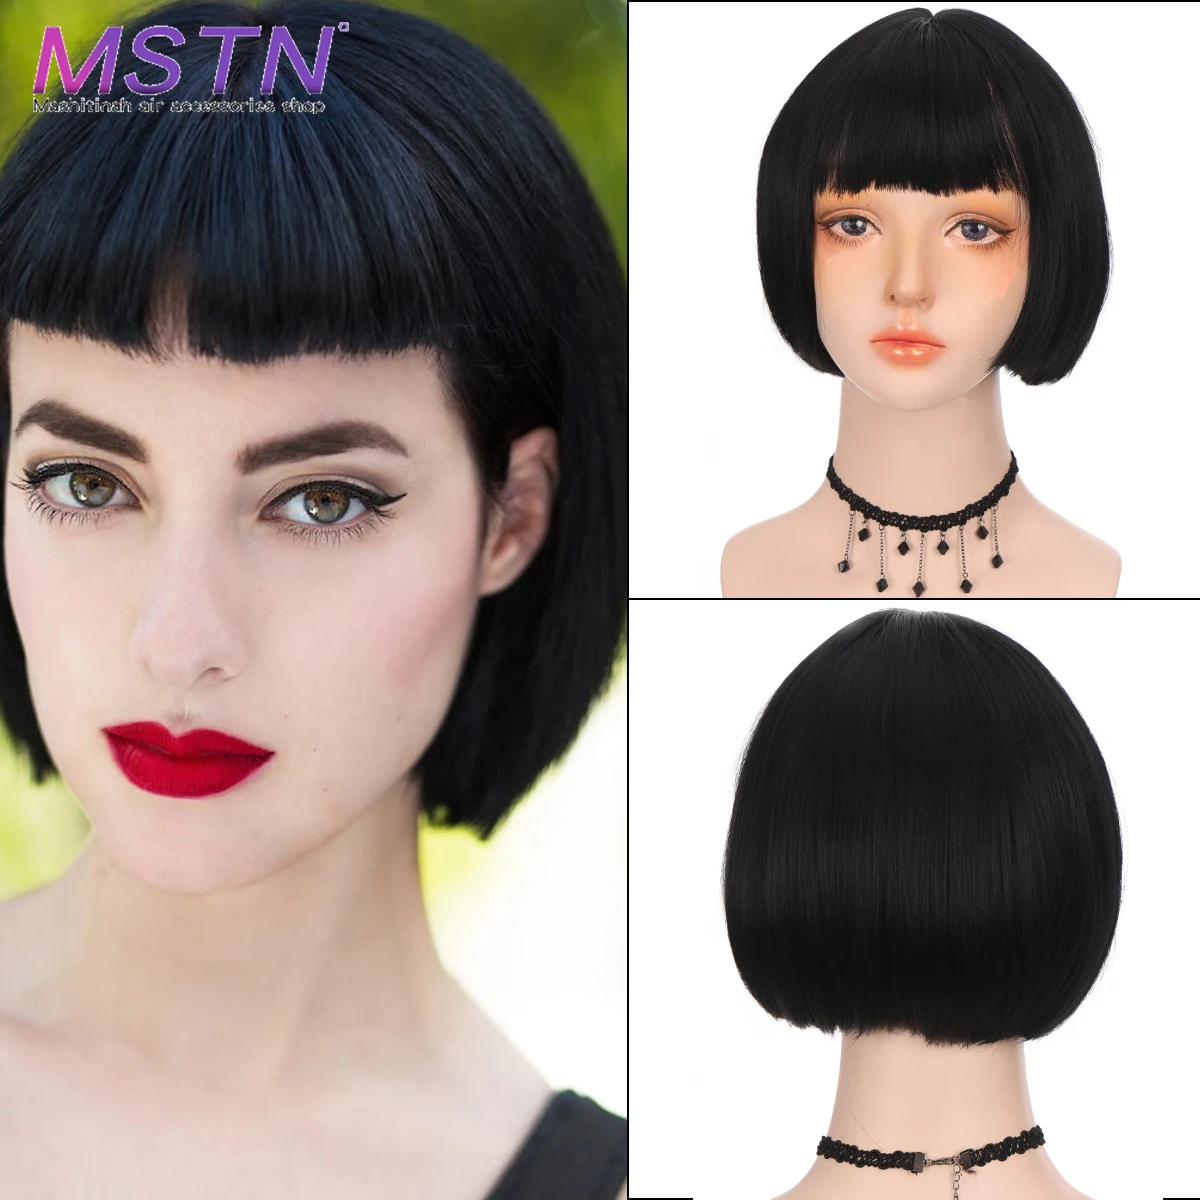 

MSTN Synthetic Short Straight Pink and Black Hair Wig Cosplay Wig Two Tone Ombre Color Women Synthetic Hair Wigs For Women